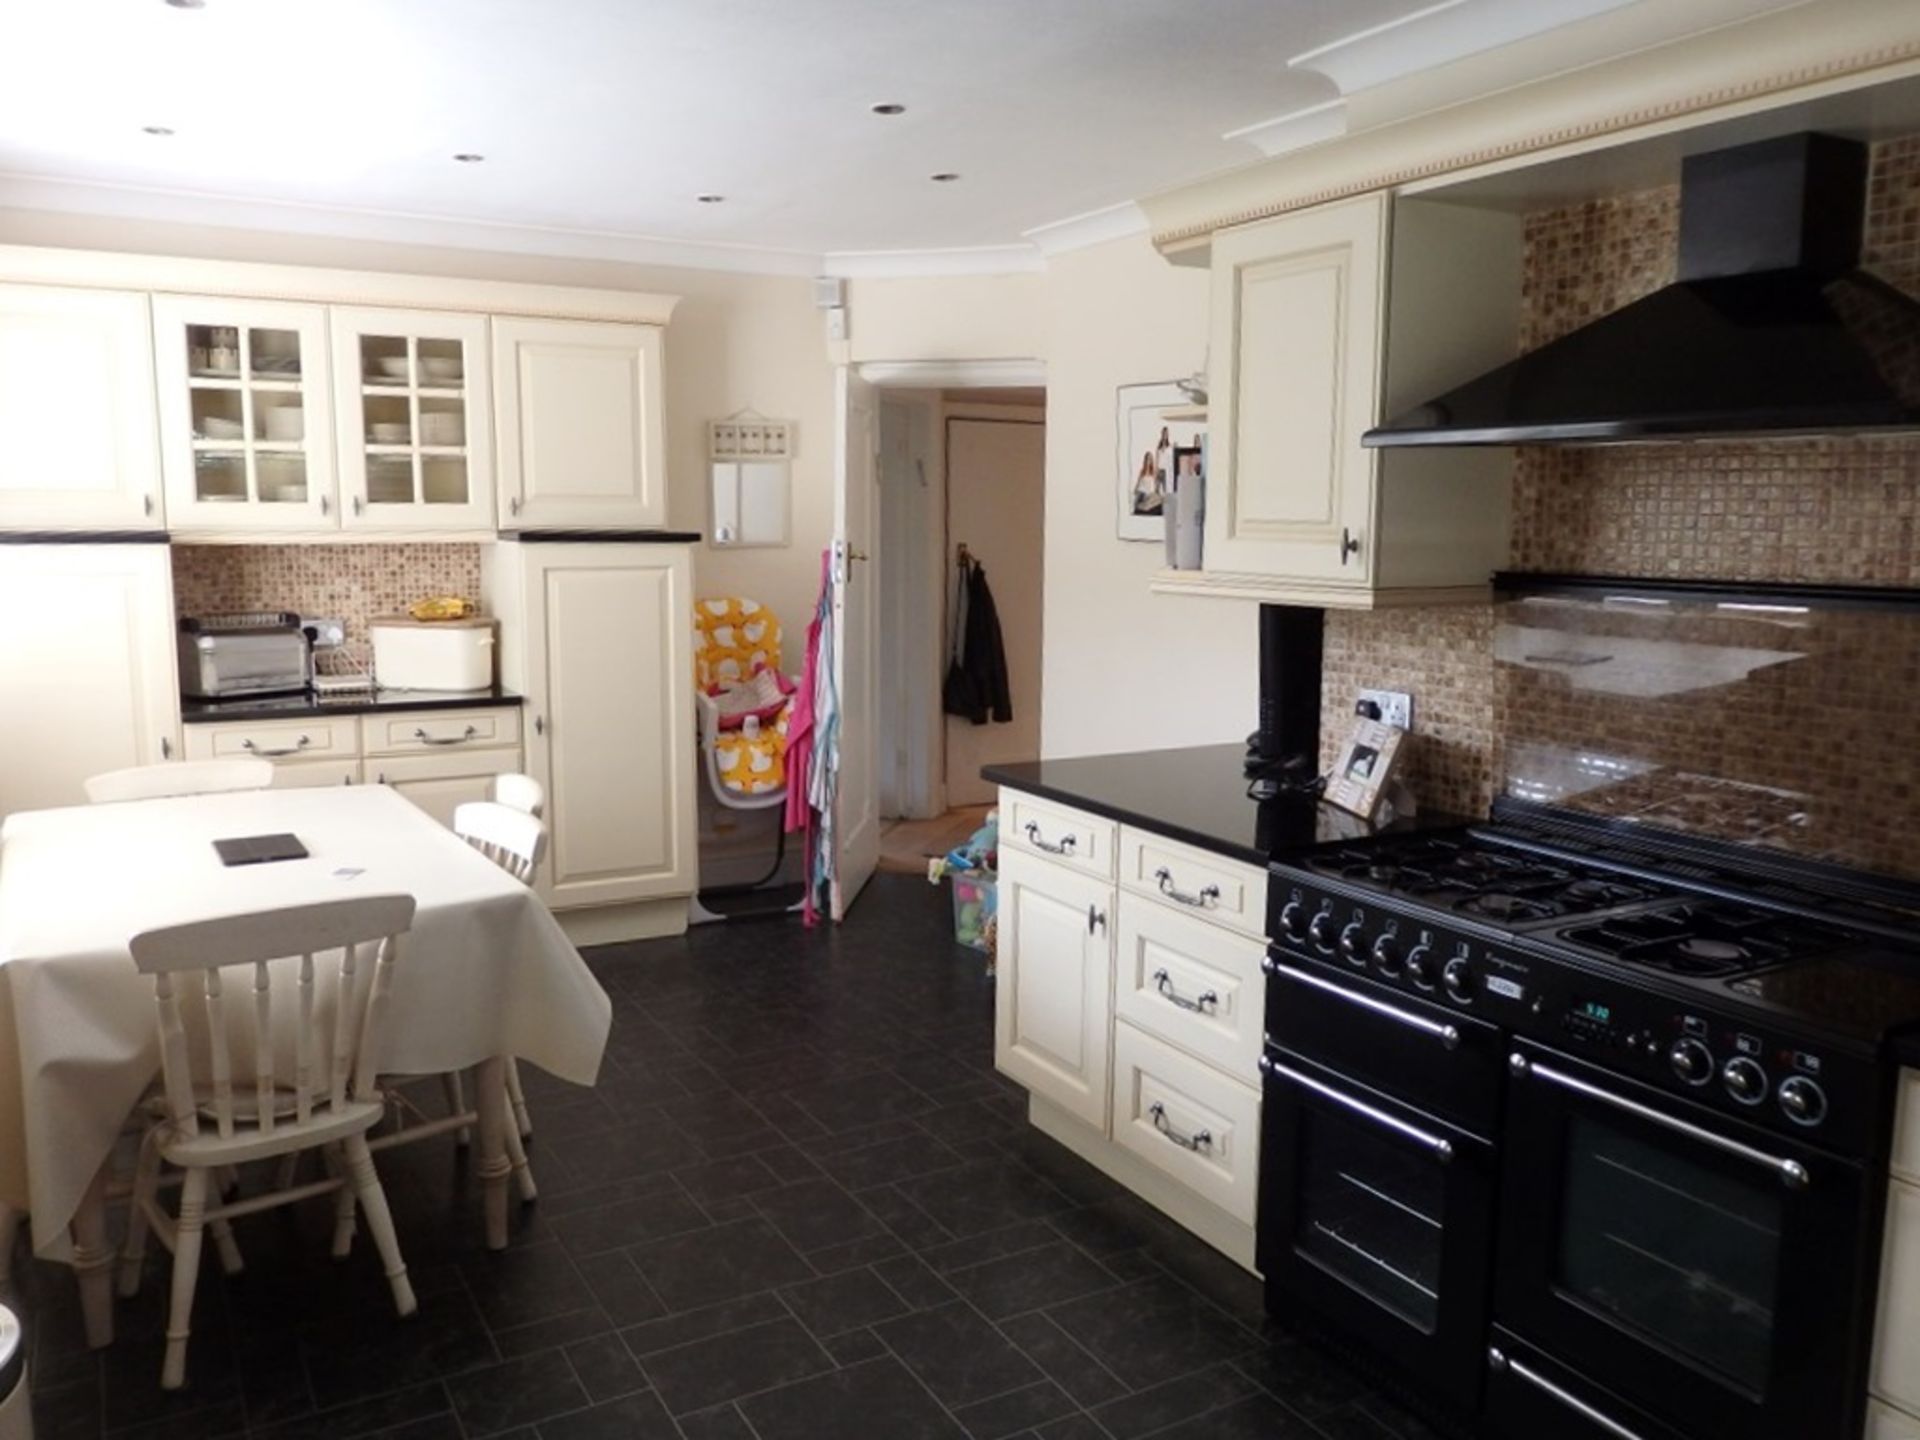 1 x Traditional Style Cream Kitchen With Luxurious Black Granite Worktops - Includes Freezer & - Image 11 of 31